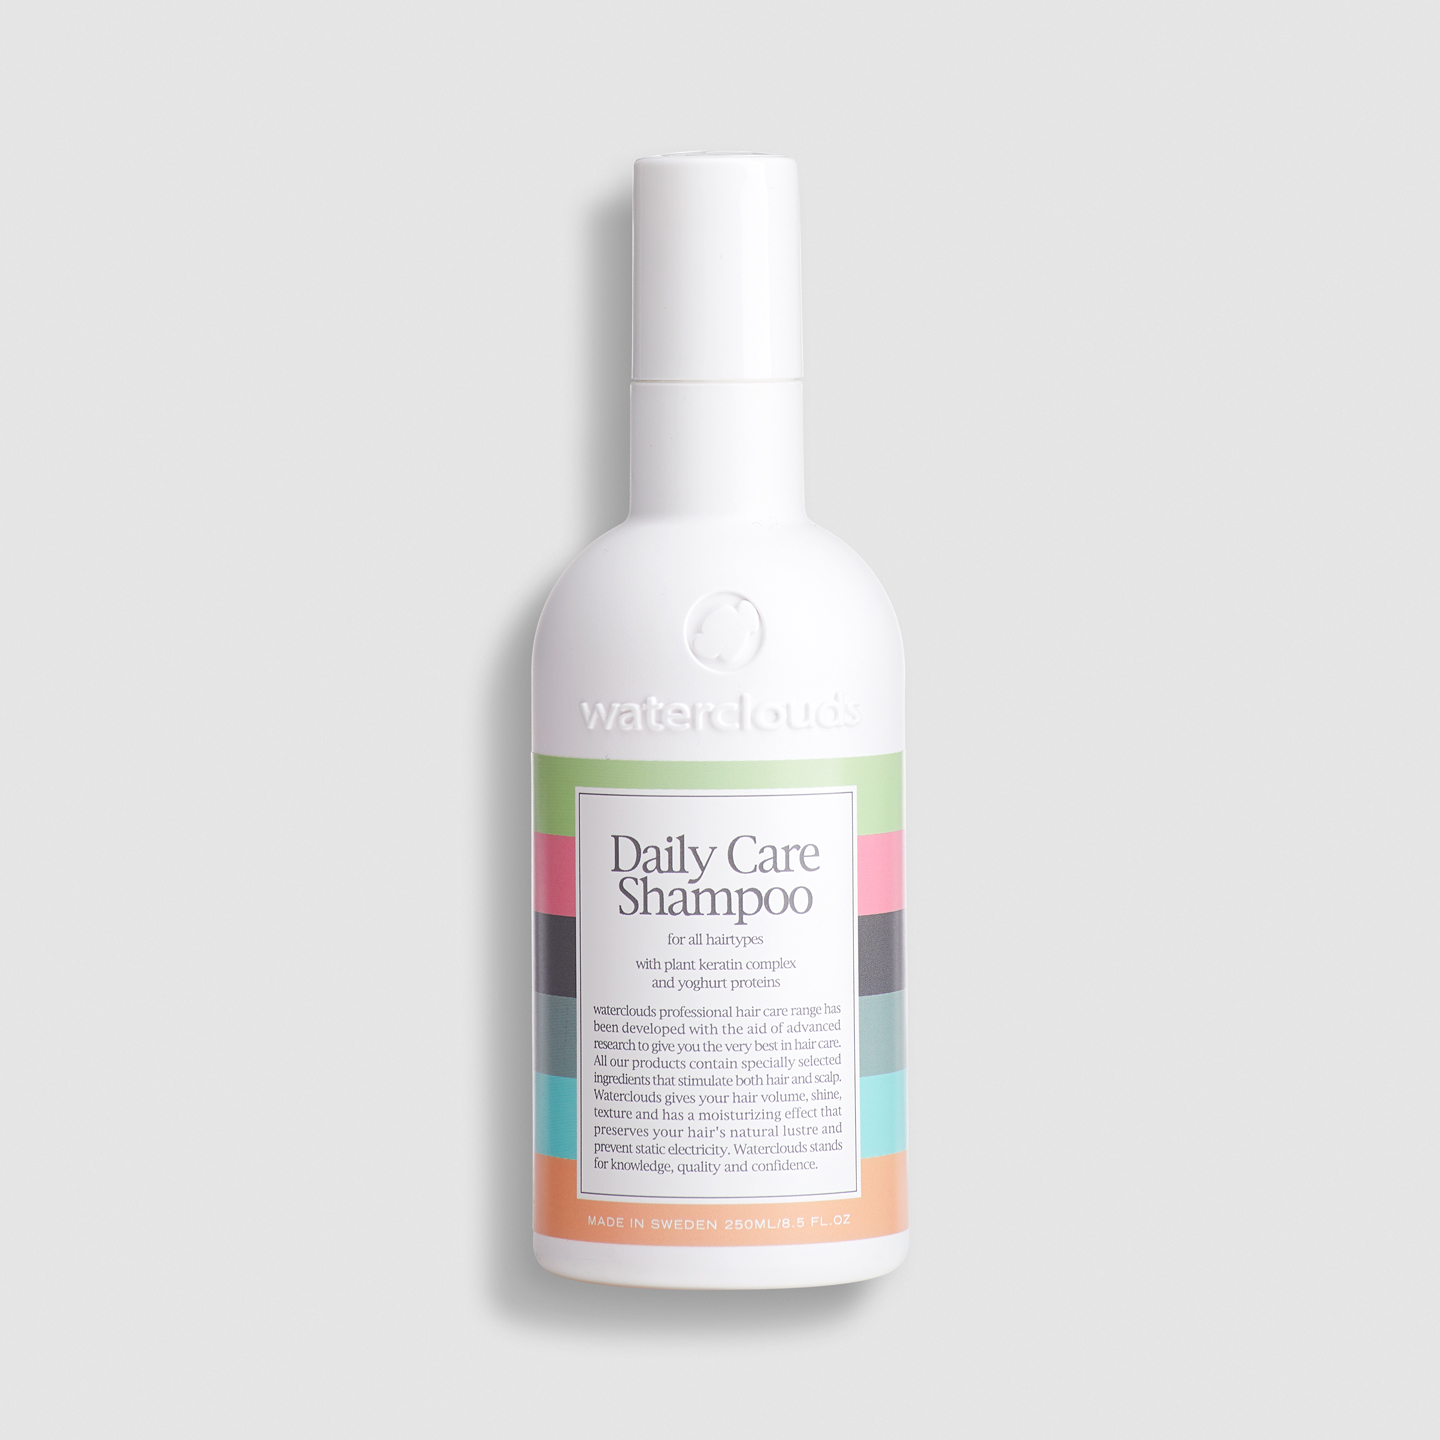 stilhed kradse Trivial Daily Care Shampoo 250ml - waterclouds.com